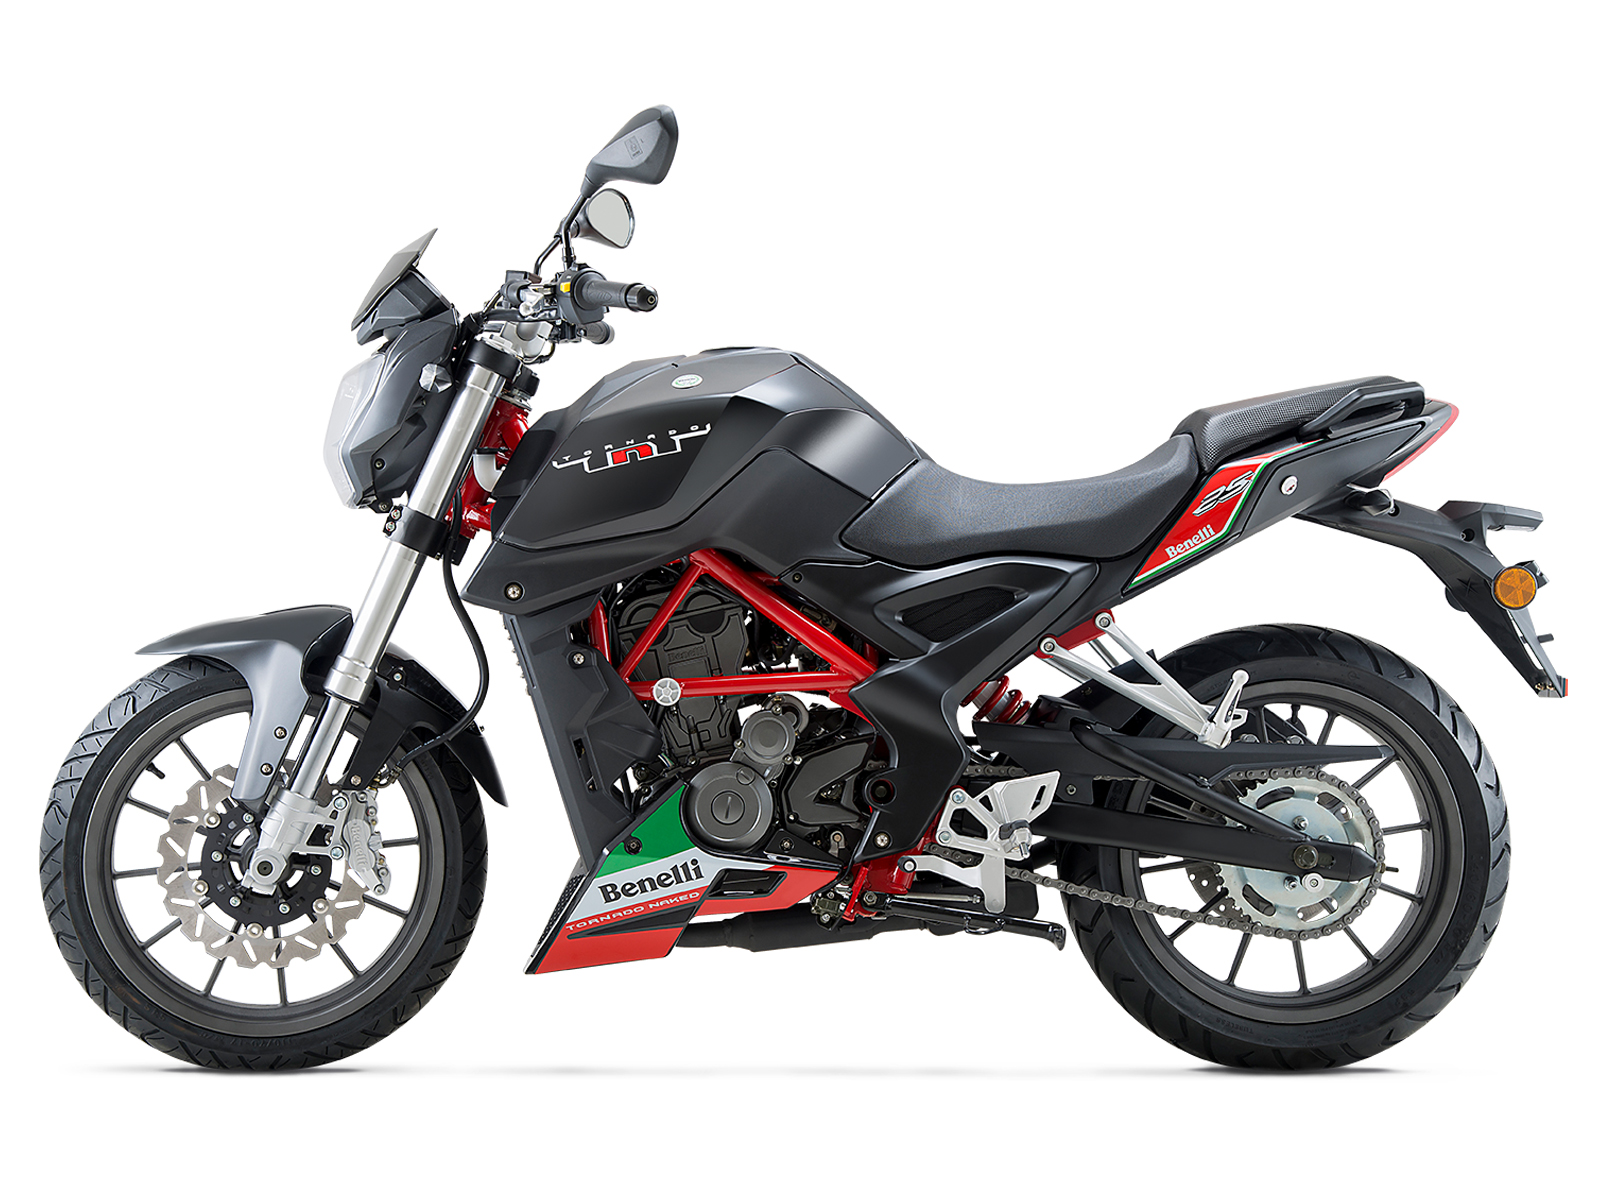 Benelli TNT 25 Black Edition introduced - Motorcycle news, Motorcycle ...